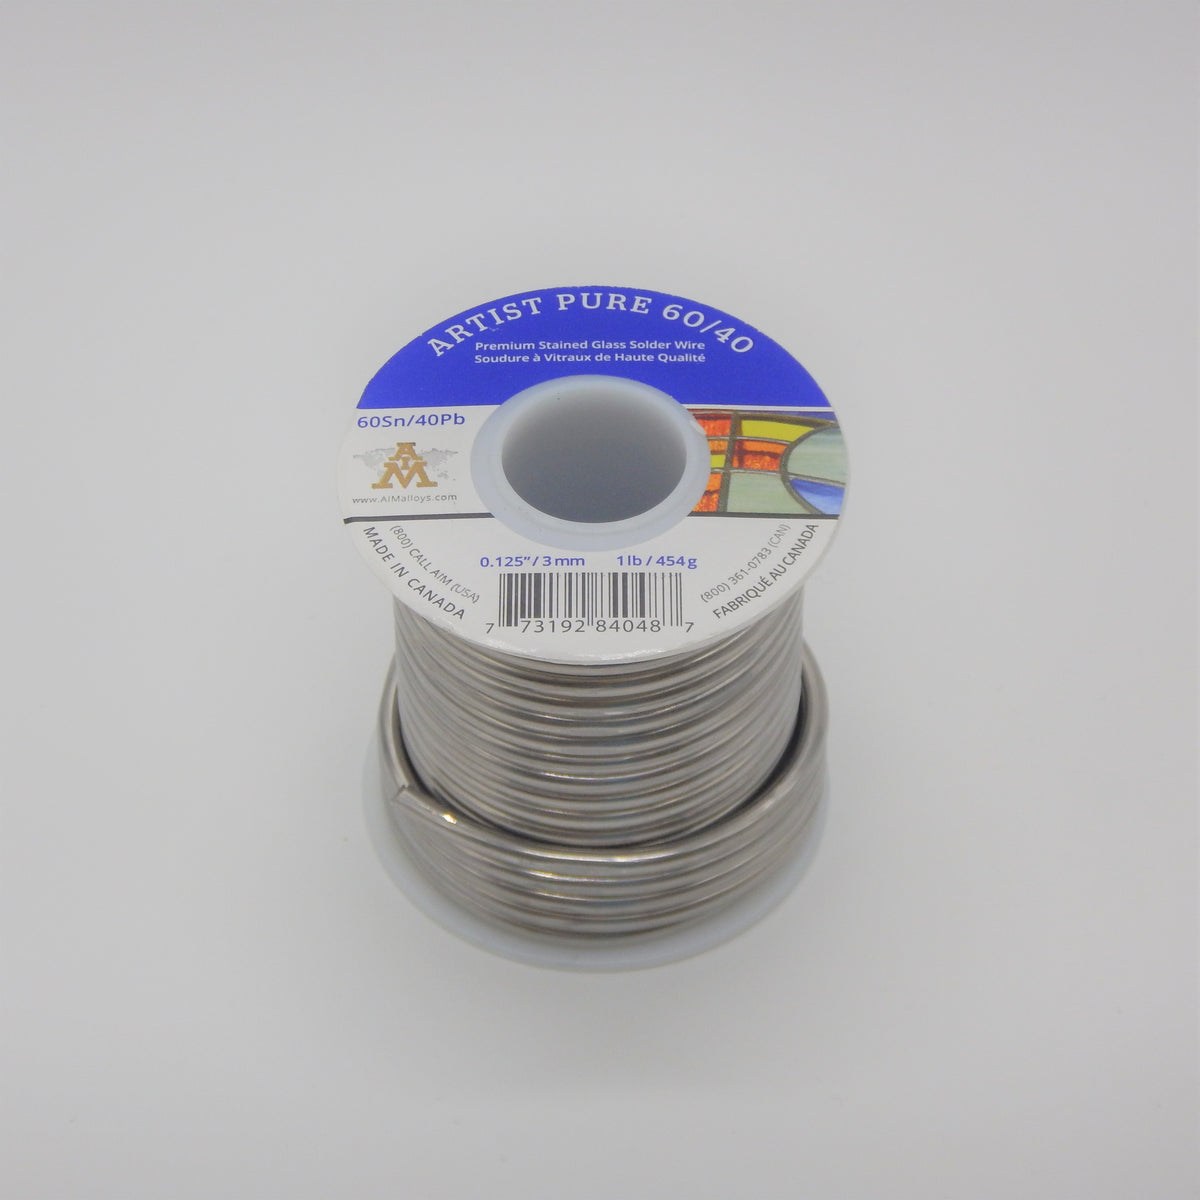 AIM Artist Pure 60/40 Premium Stained Glass Solid Core Solder Wire